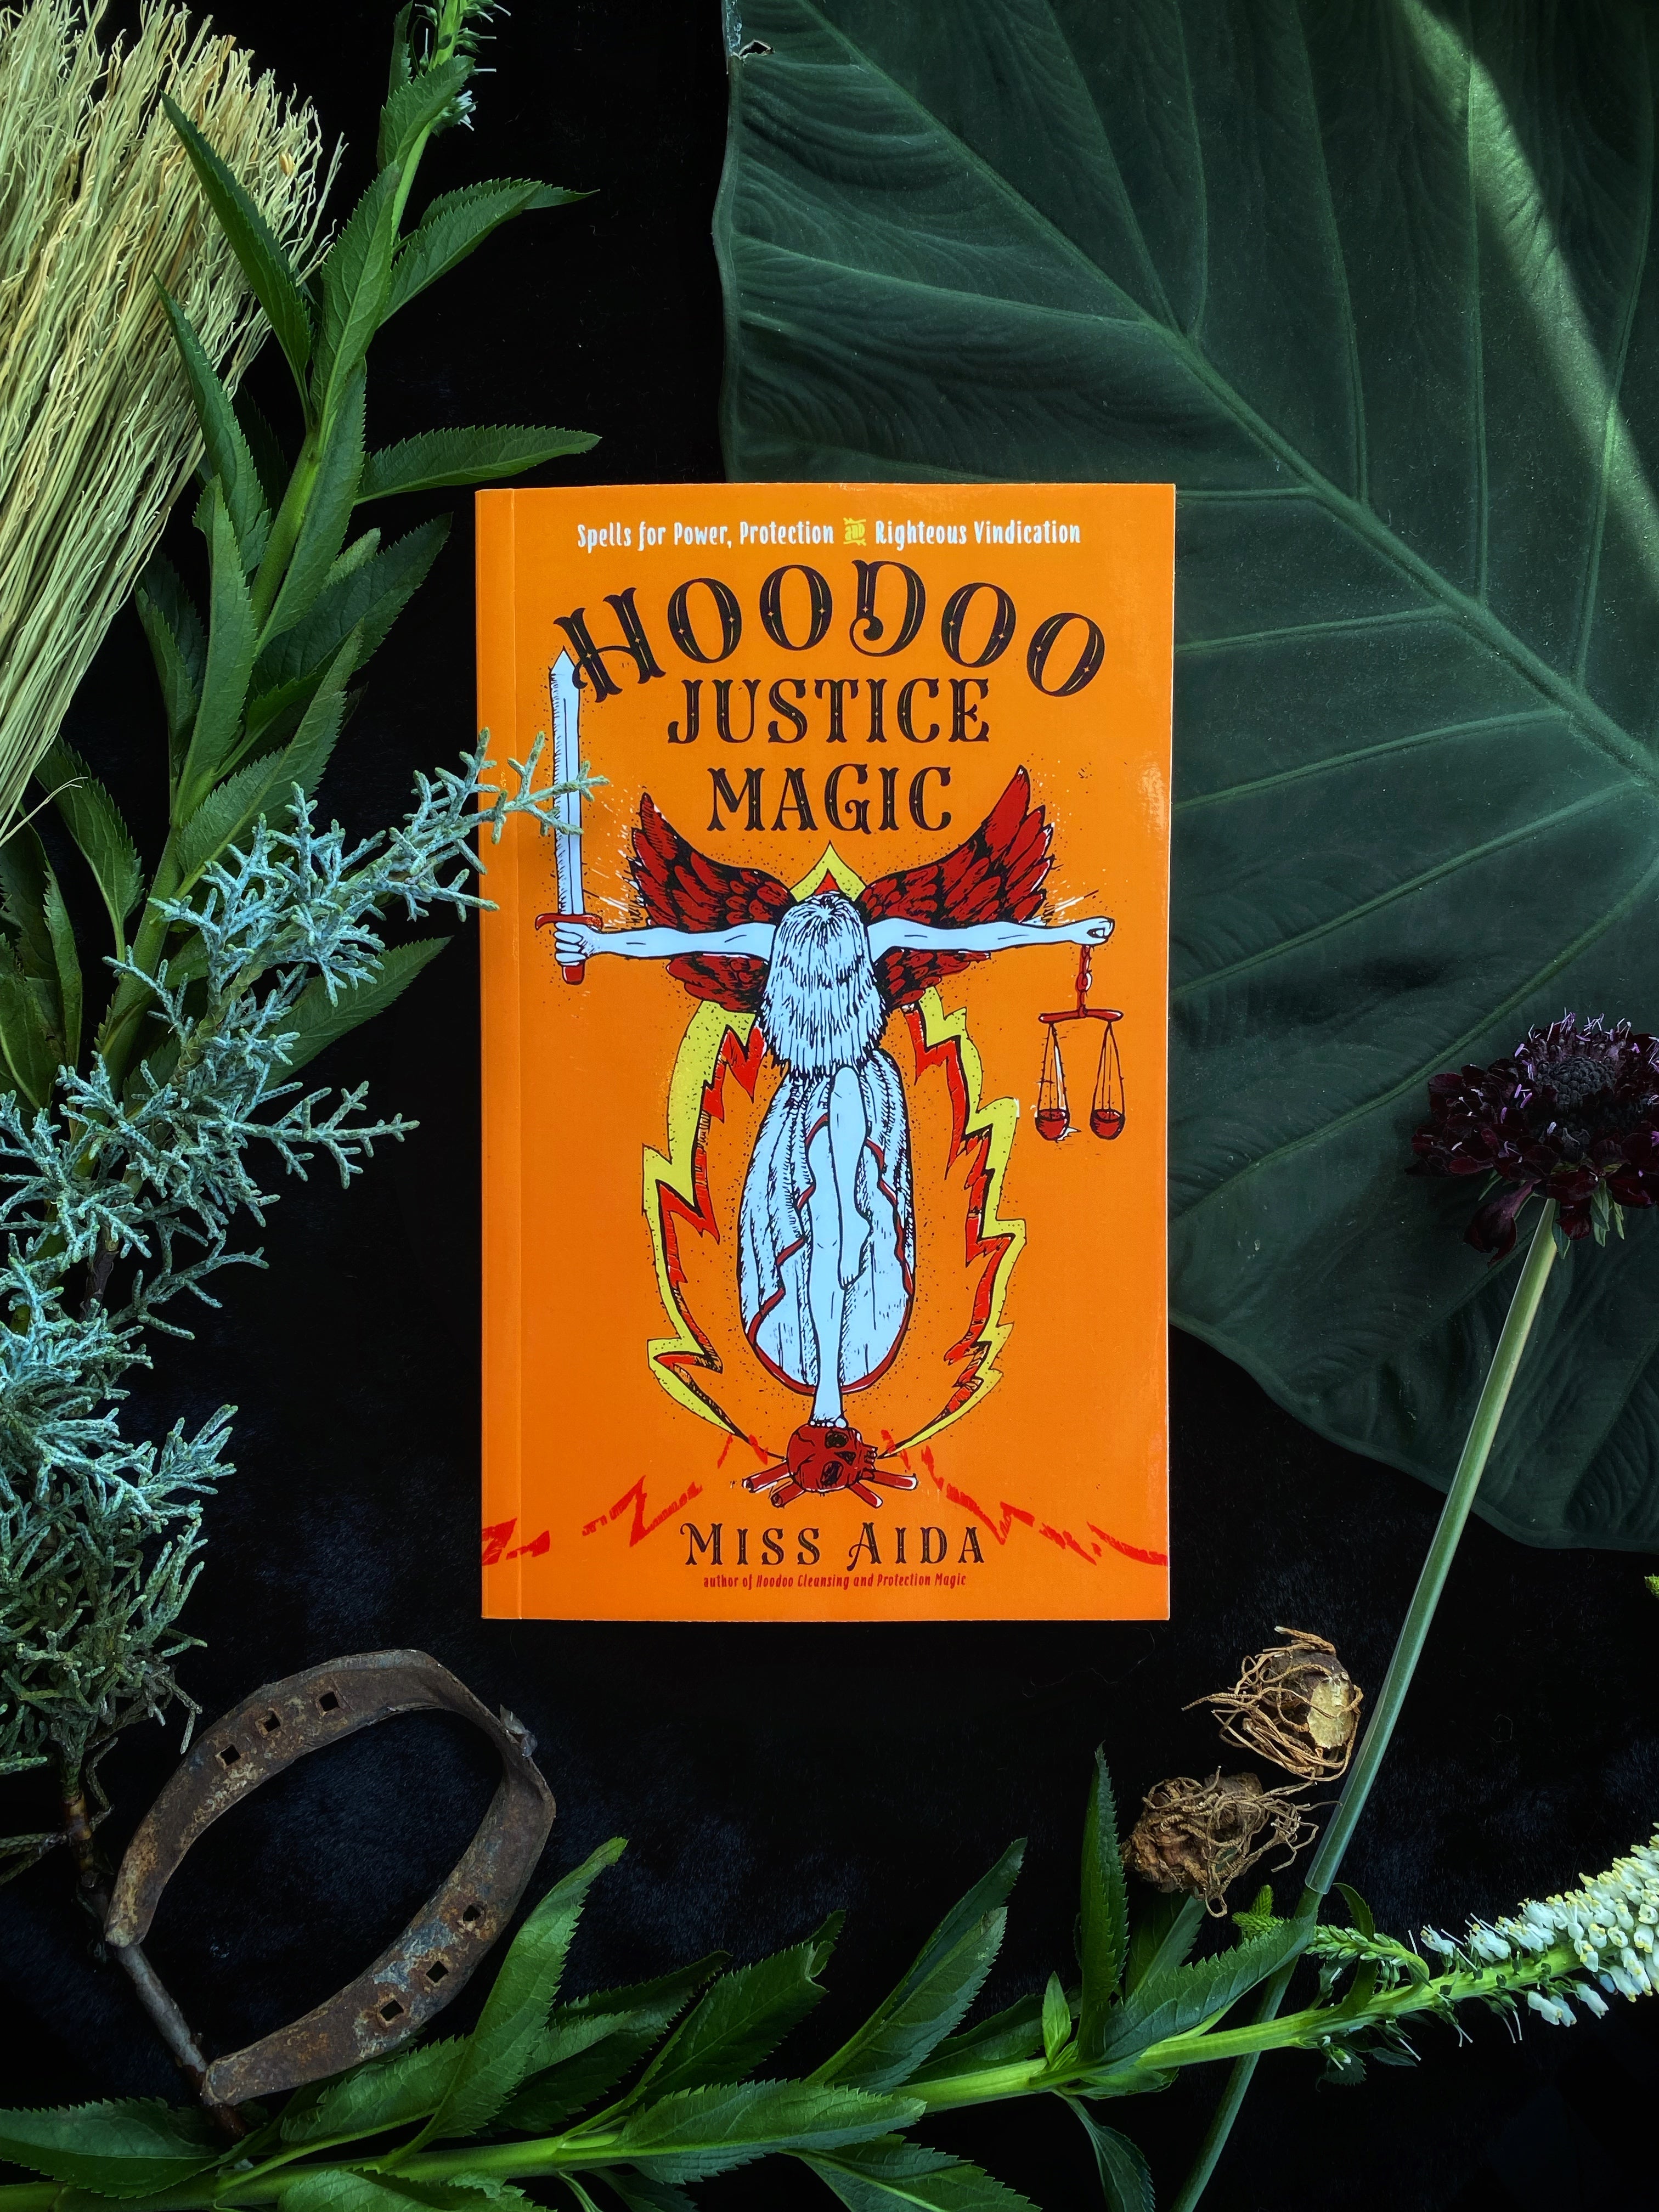 Hoodoo Justice Magic : Spells for Power, Protection and Righteous Vindication - Keven Craft Rituals